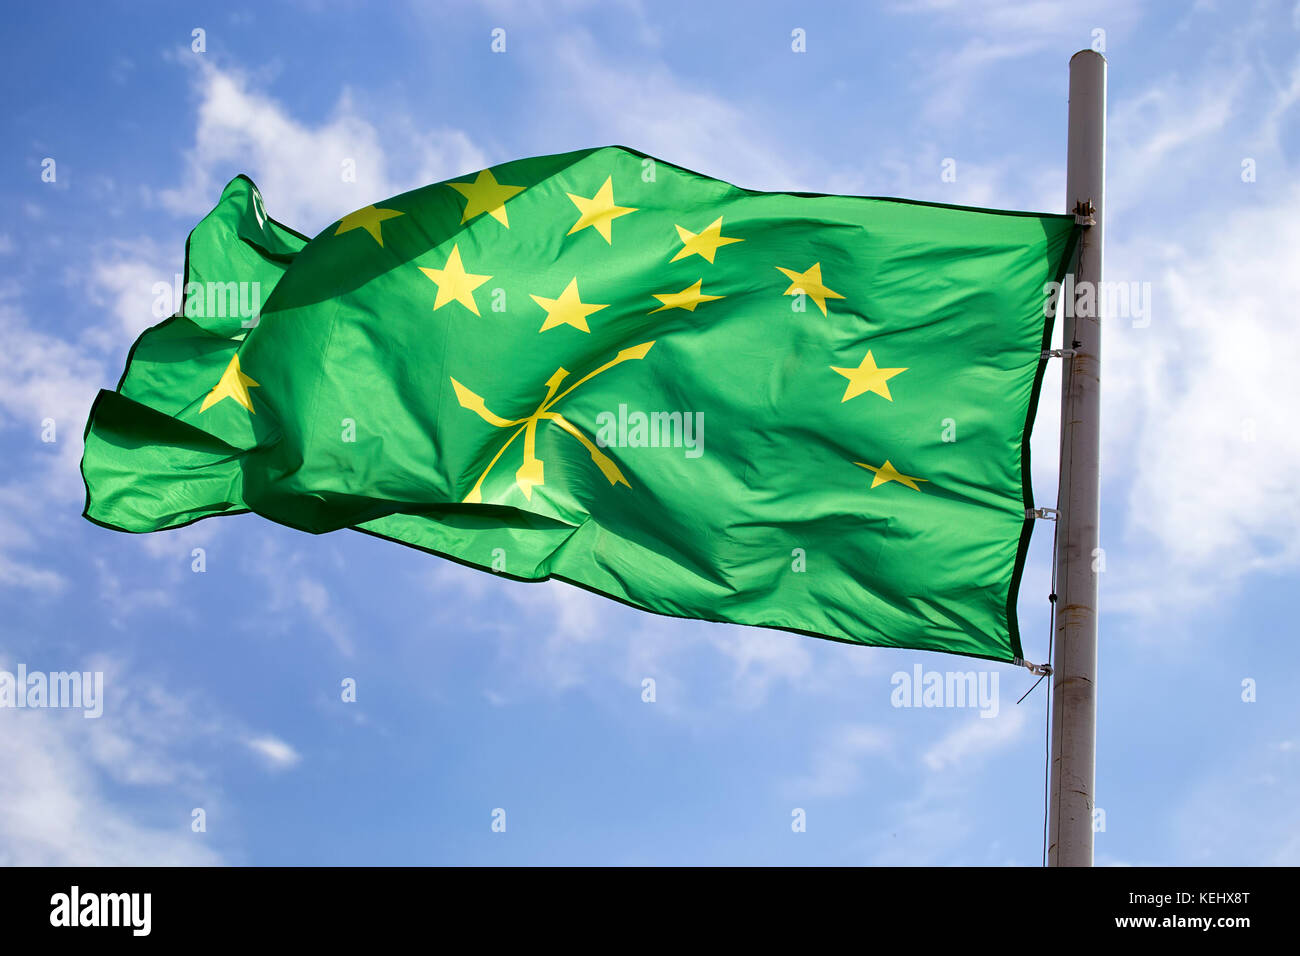 Adygian flag on sky and cloud background Stock Photo